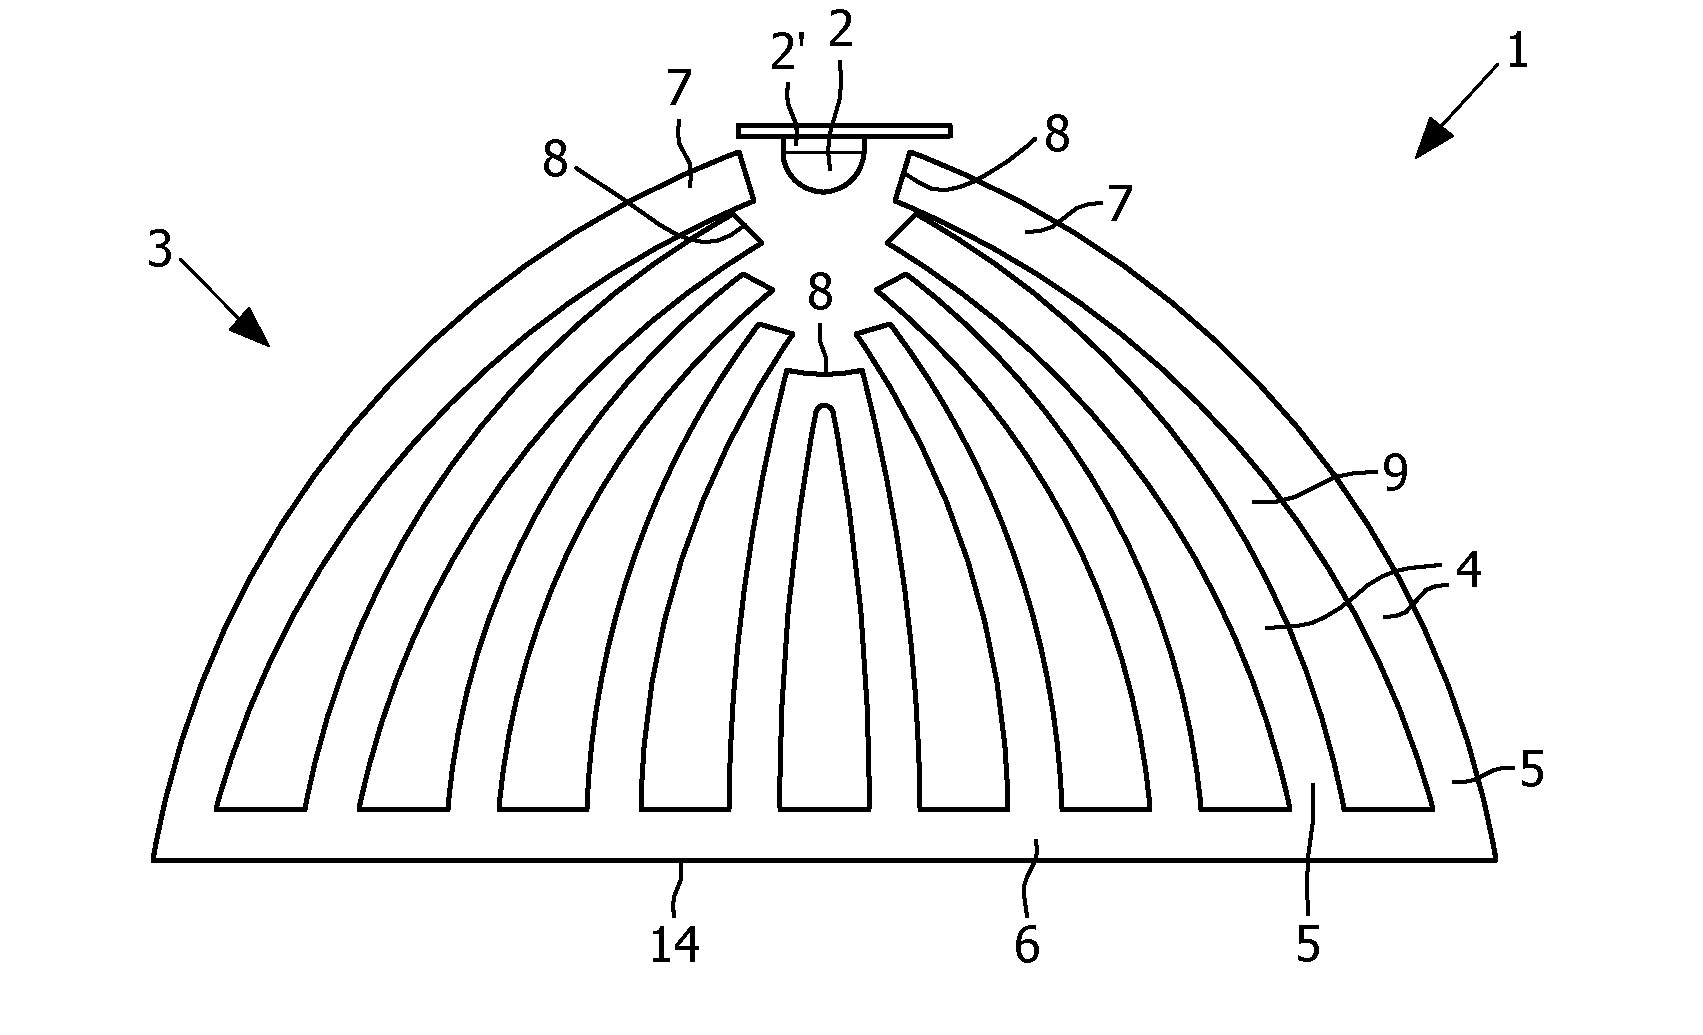 Lighting device having a lens including a plurality of interconnected elongated light-guiding elements